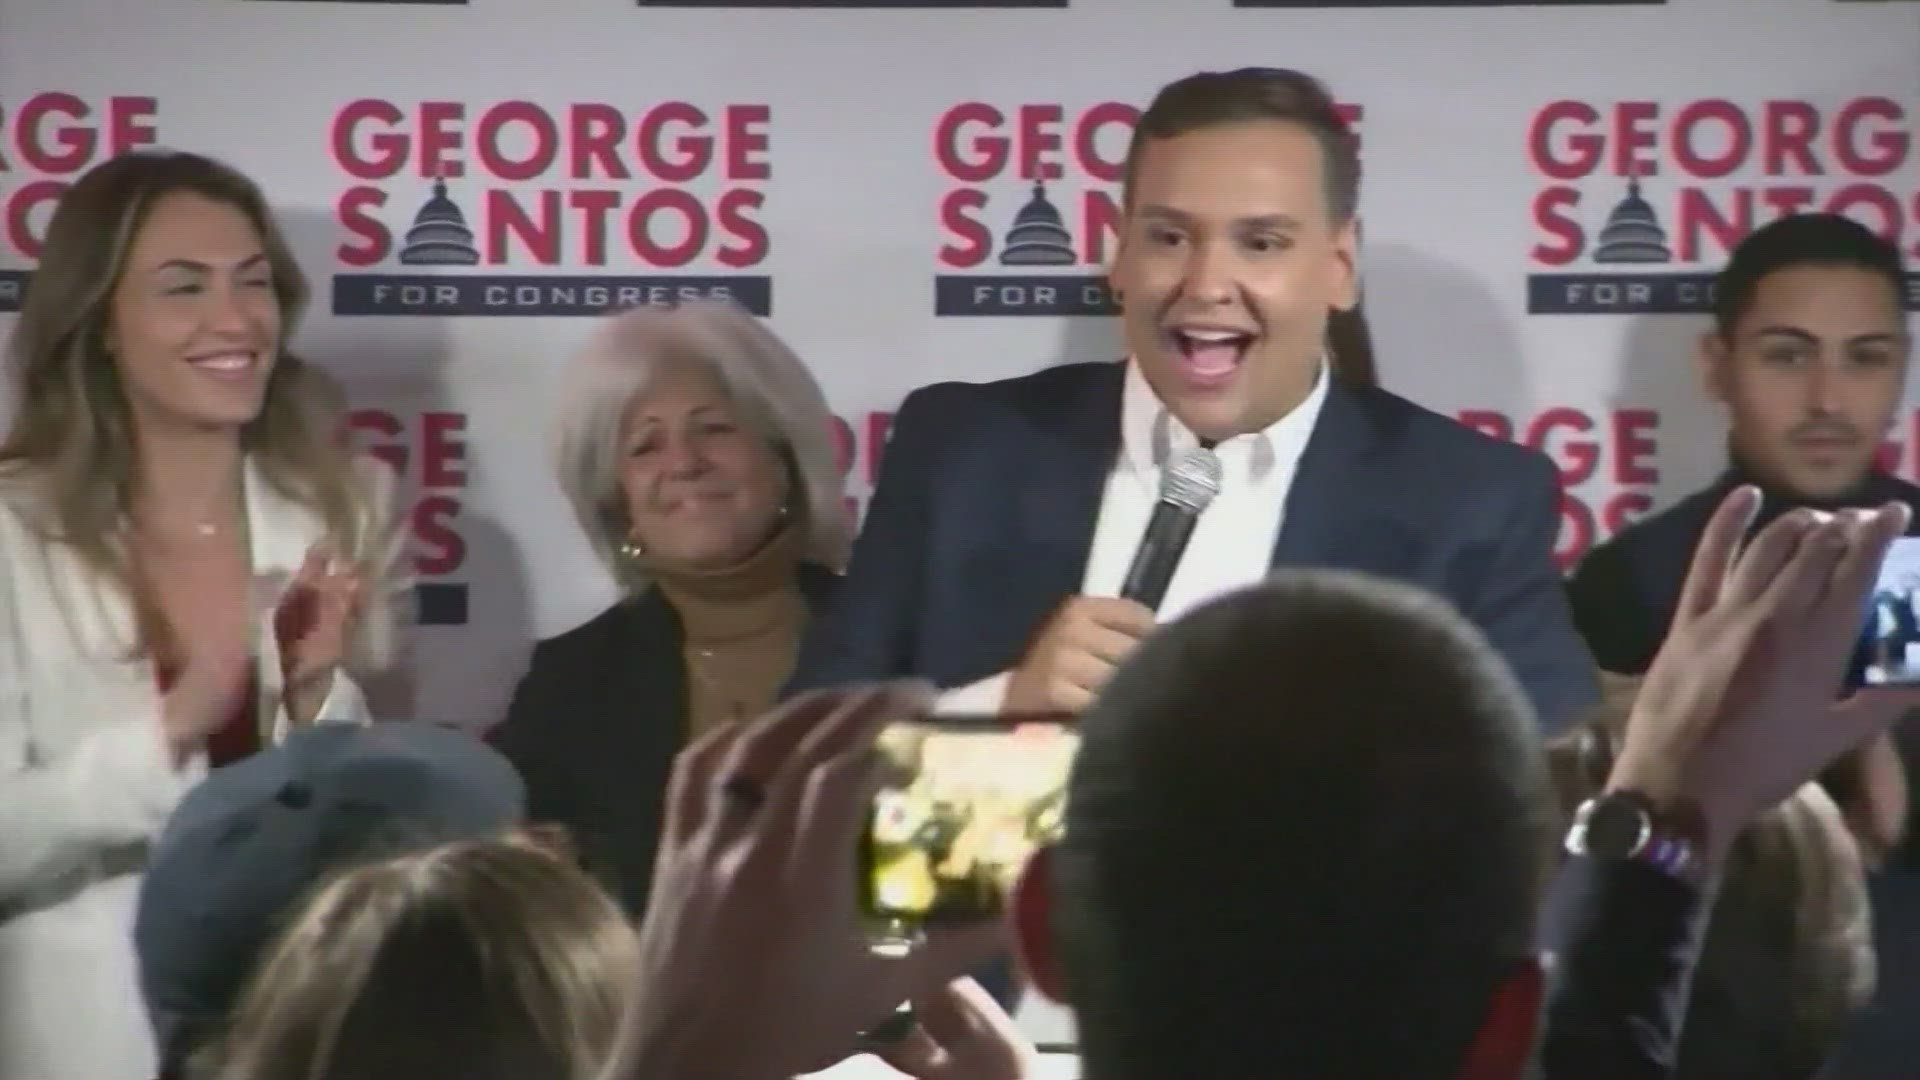 Effort to expel George Santos from the House fails